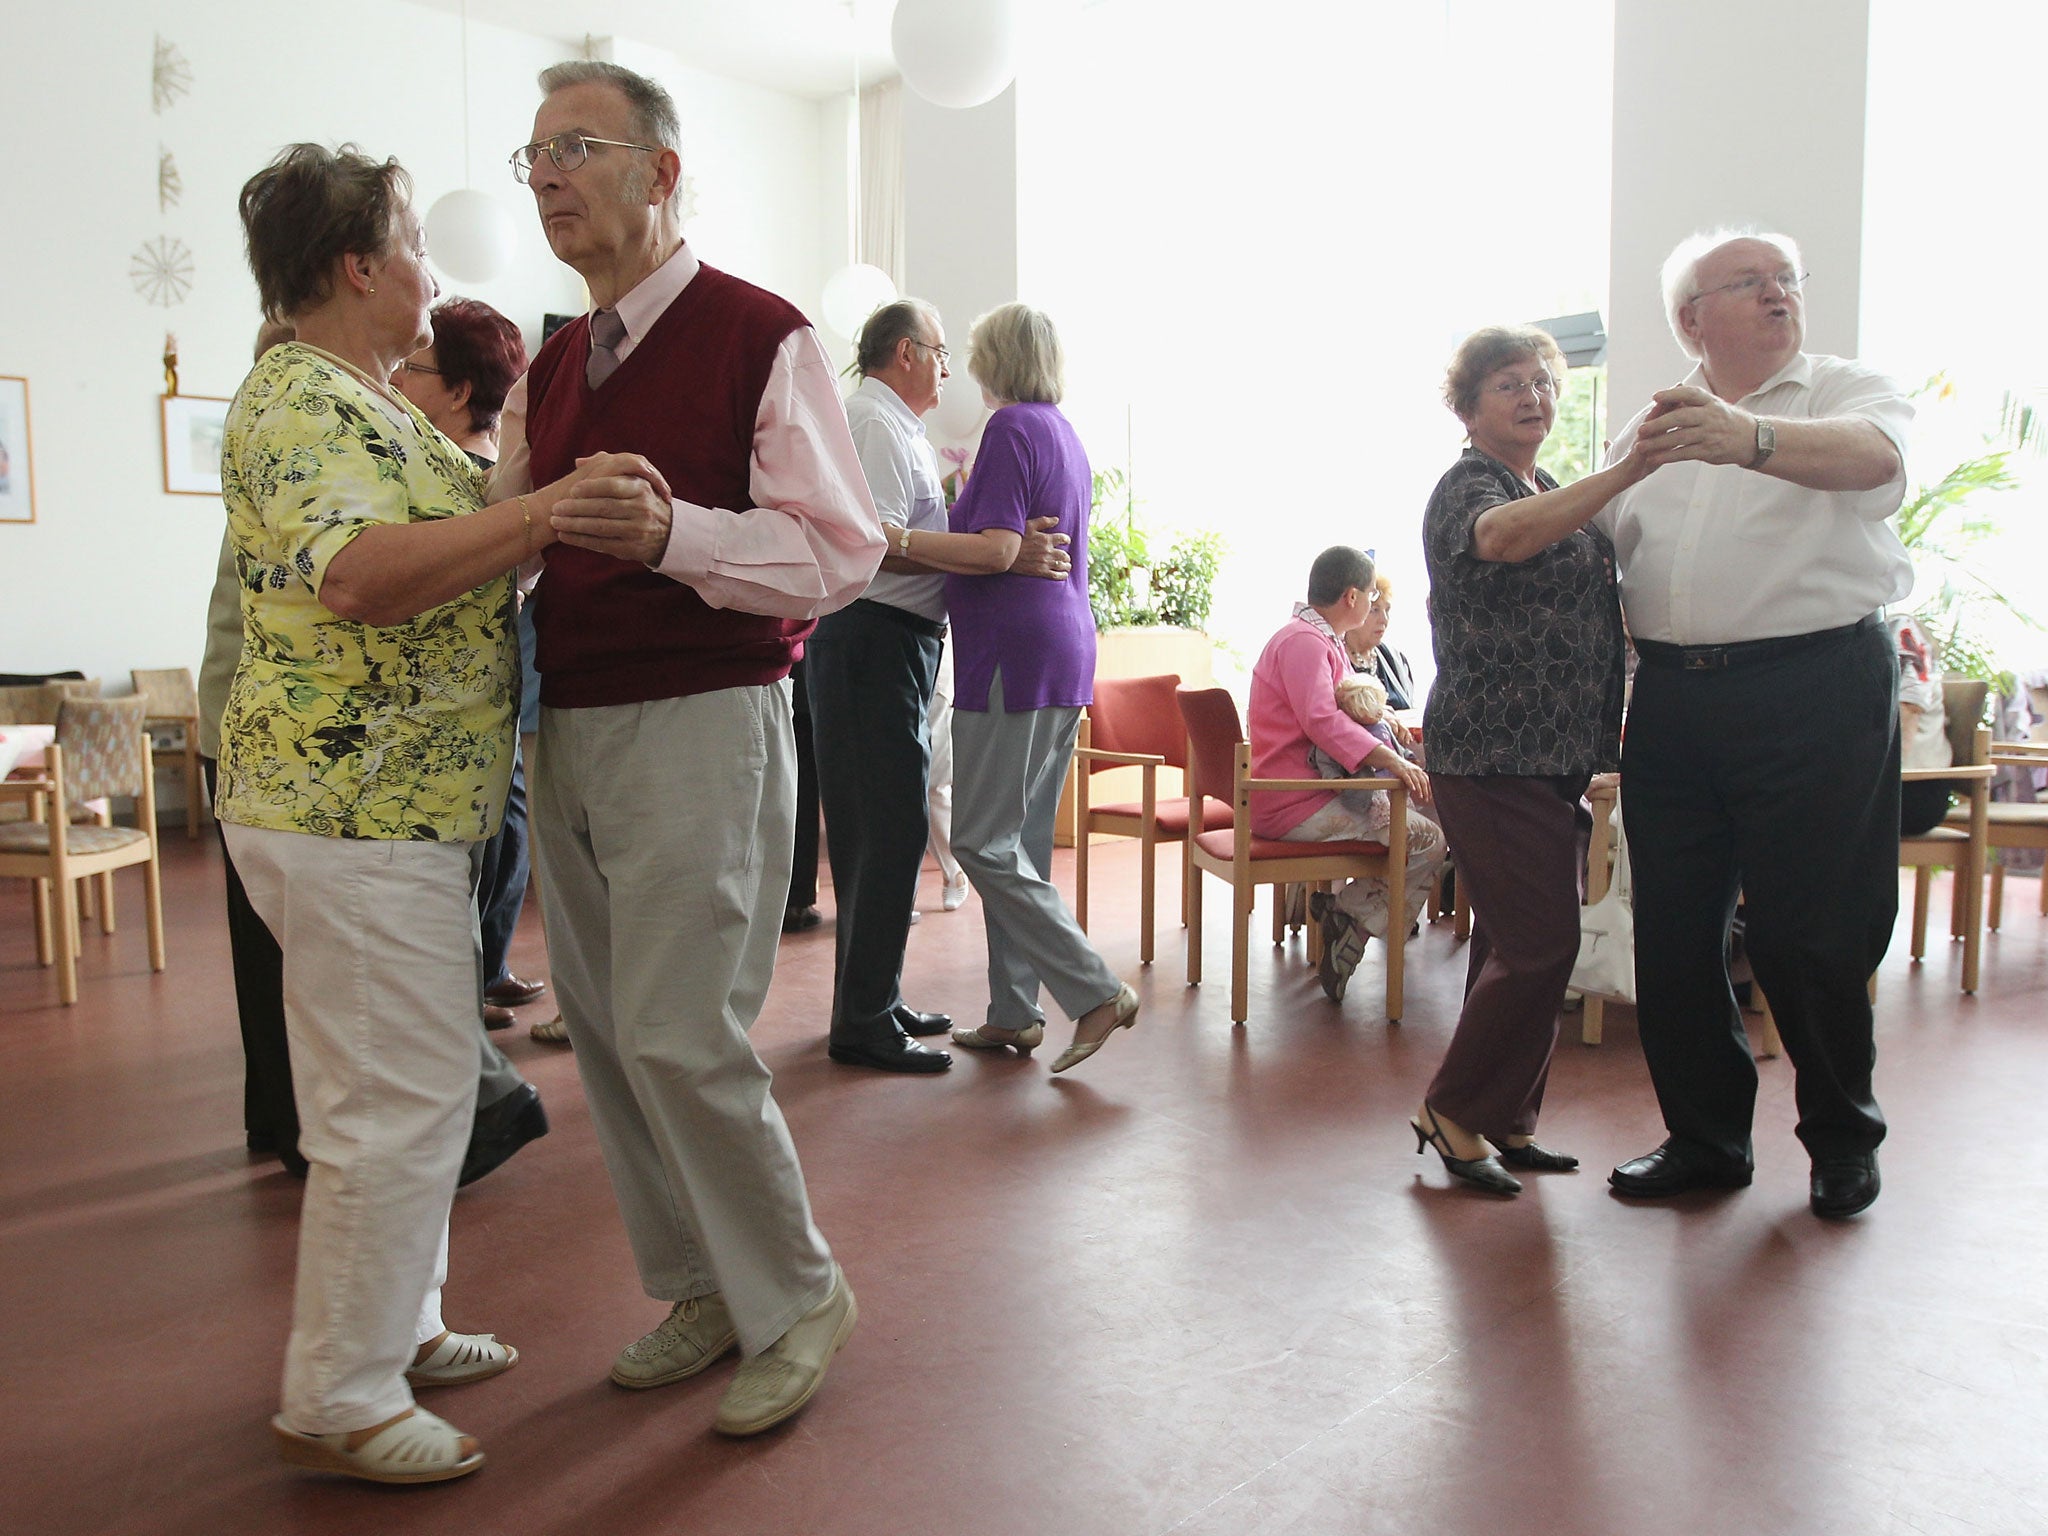 Elderly people dance during an afternoon get-together in the community room of the Sewanstrasse senior care home in Lichtenberg district on August 30, 2011 in Berlin, Germany.